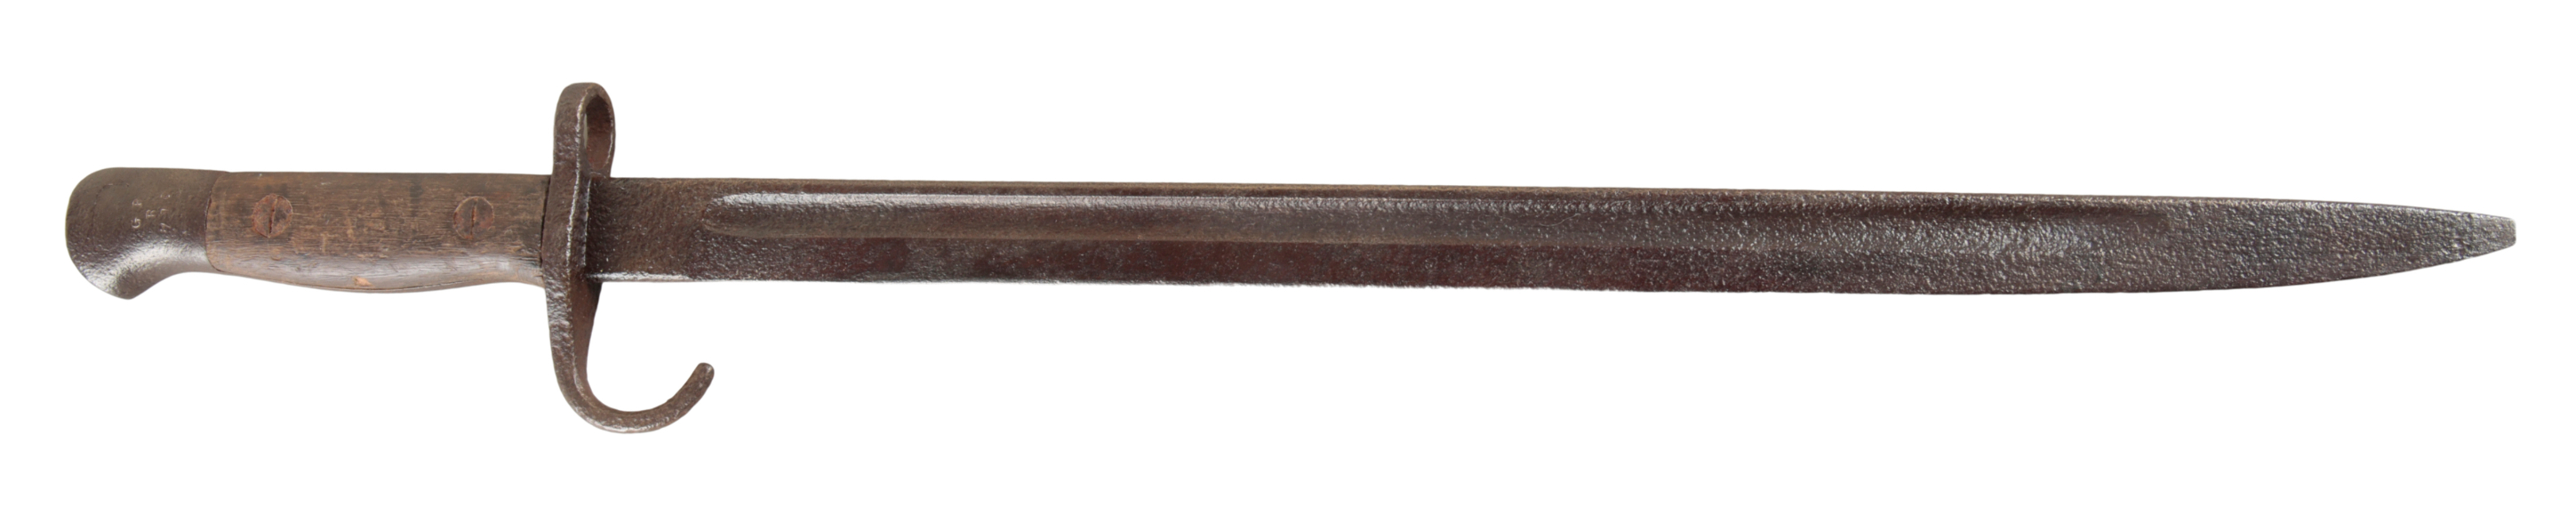 A BRITISH WWI PATTERN BAYONET WITH HOOKED QUILLON